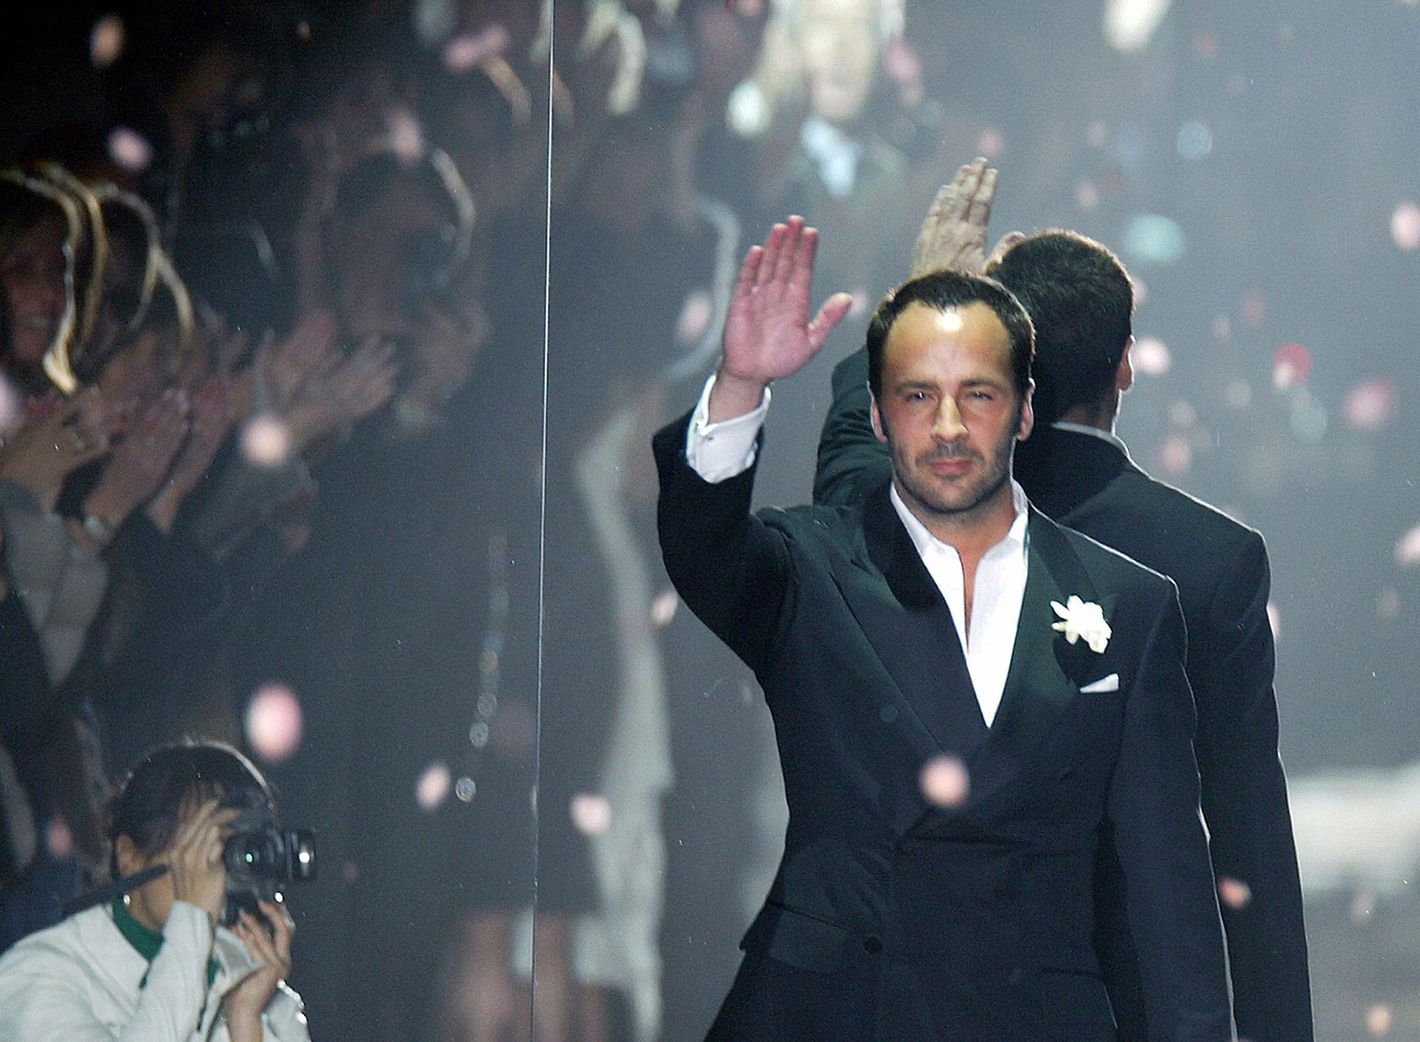 Blast From The Past: Looking Back At Tom Ford's Helm At Gucci